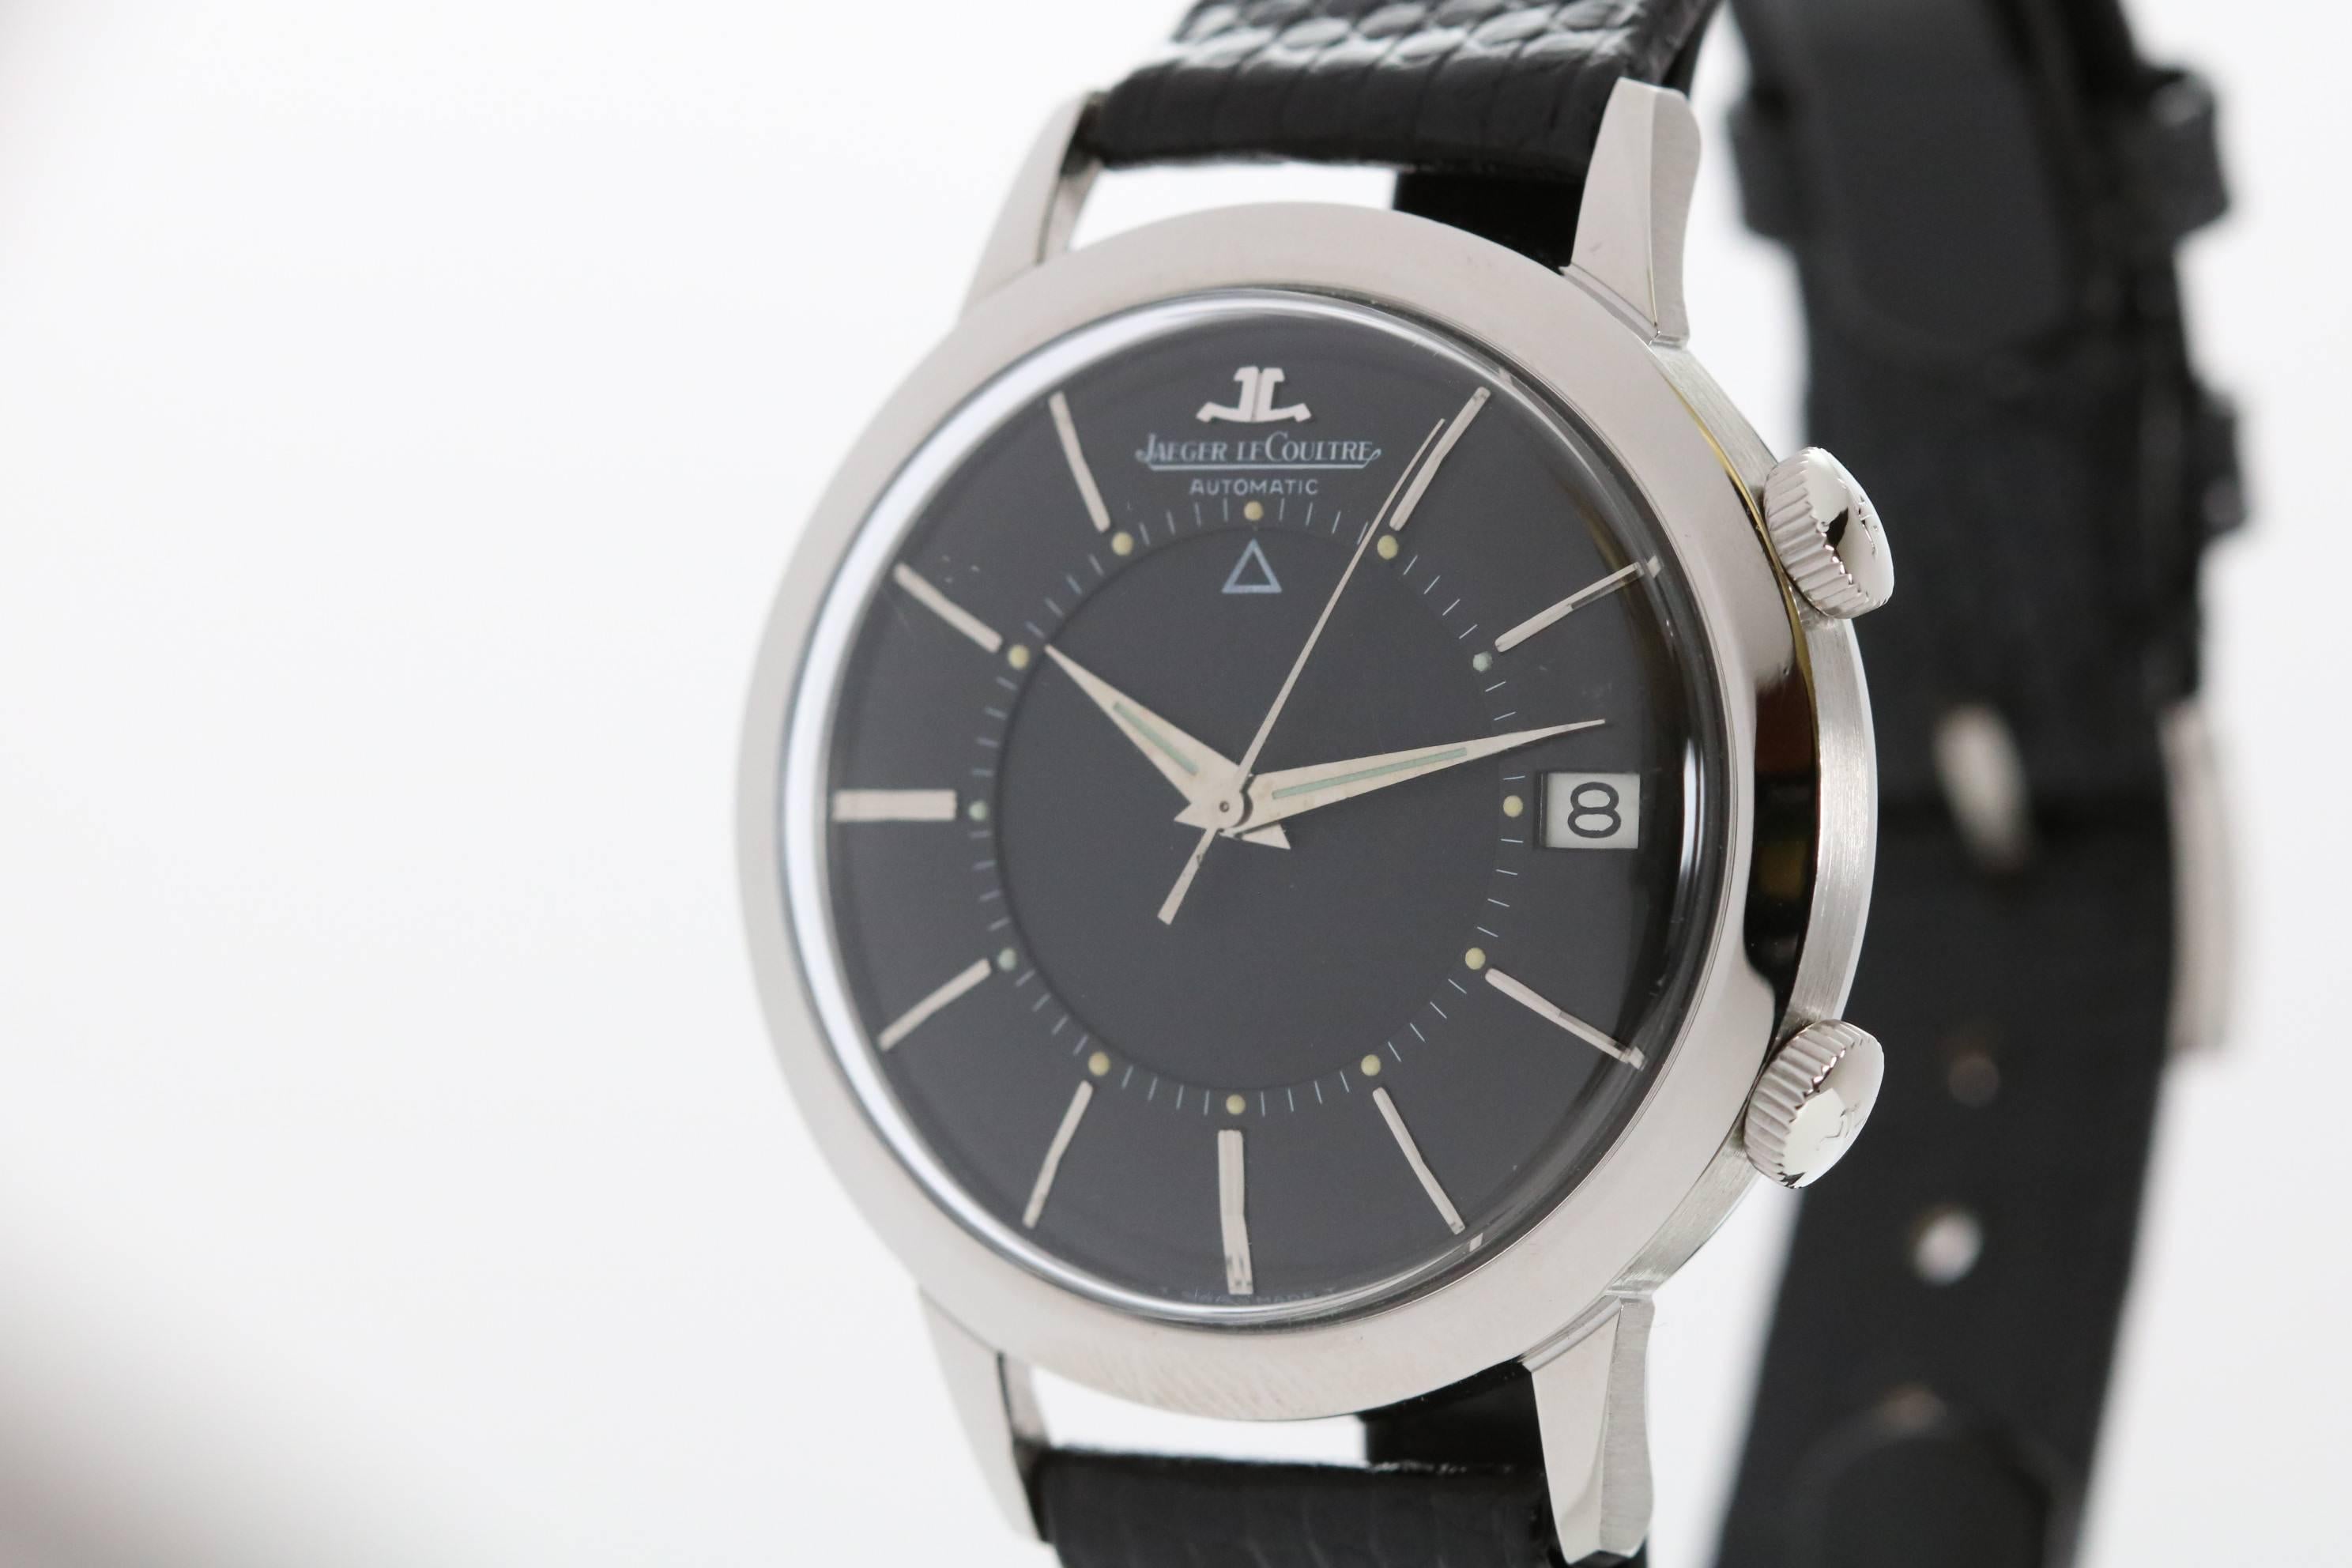 Jaeger LeCoultre Memovox reference 855 in stainless steel. 